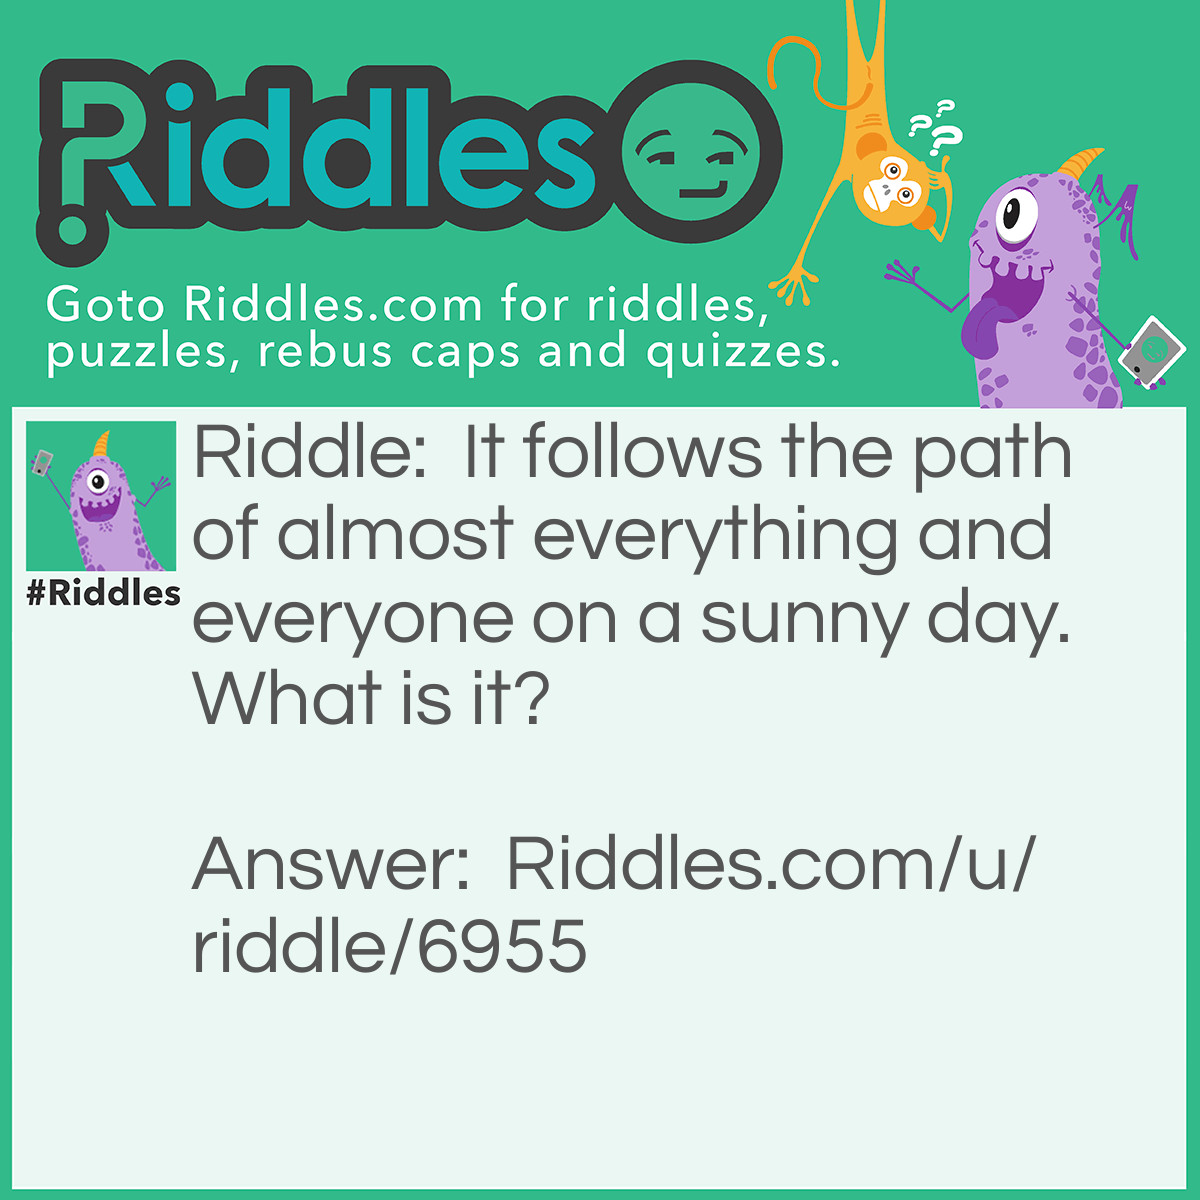 Riddle: It follows the path of almost everything and everyone on a sunny day. What is it? Answer: A shadow!